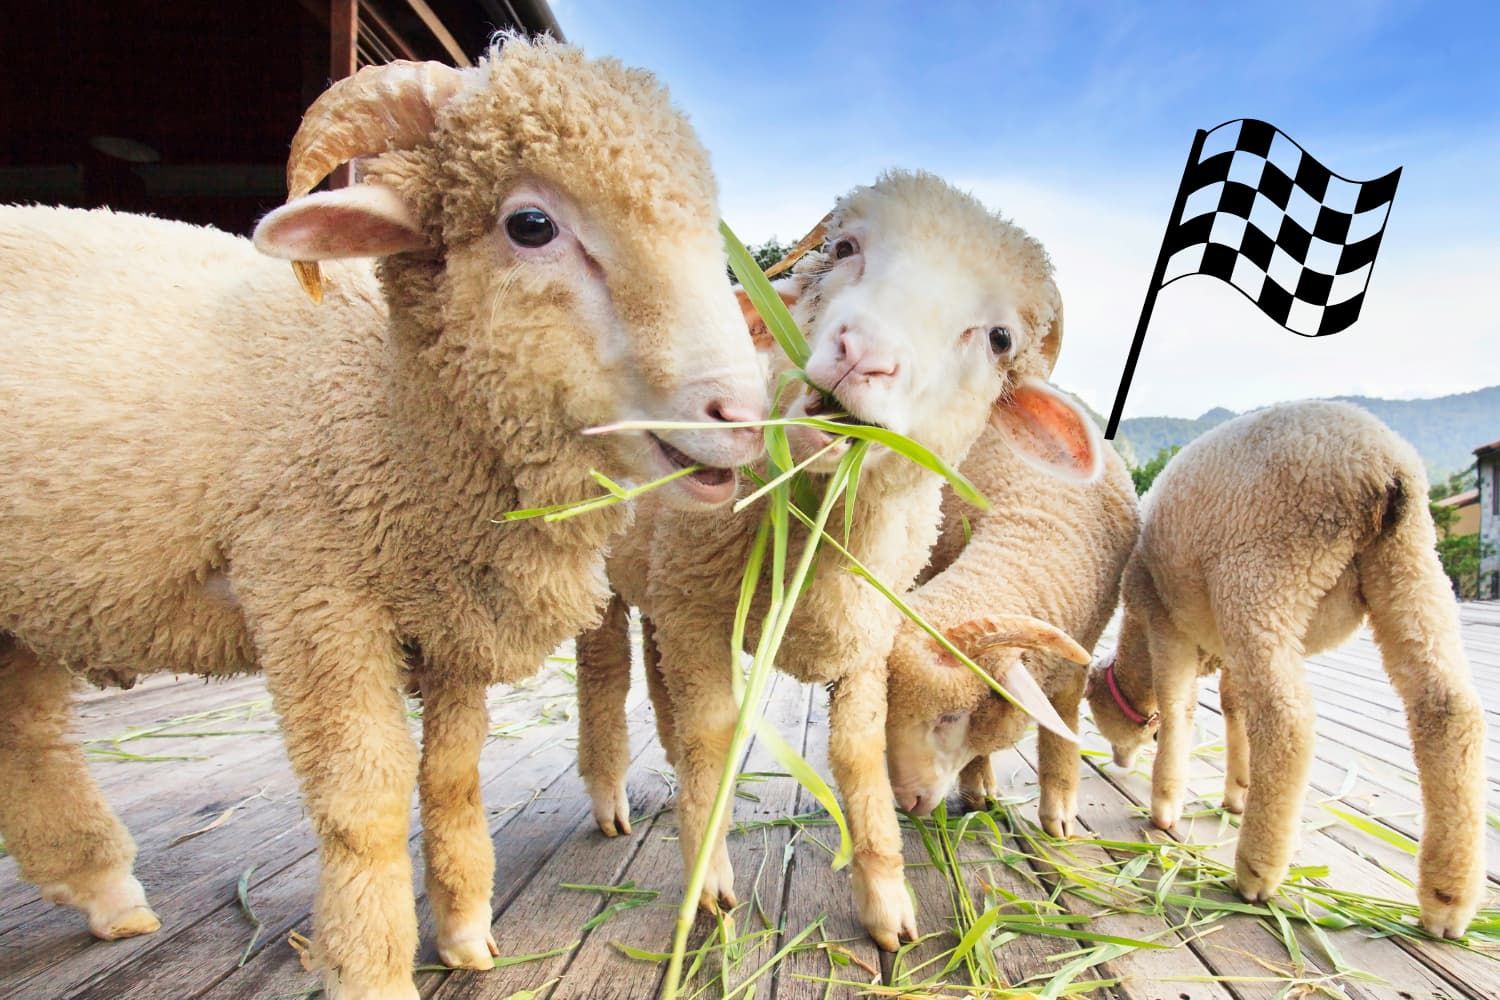 Game%20-%20OT%20Psalm%2023%20-%20The%20feed%20the%20sheep%20relay%20race-6bb58723 Hope / despair